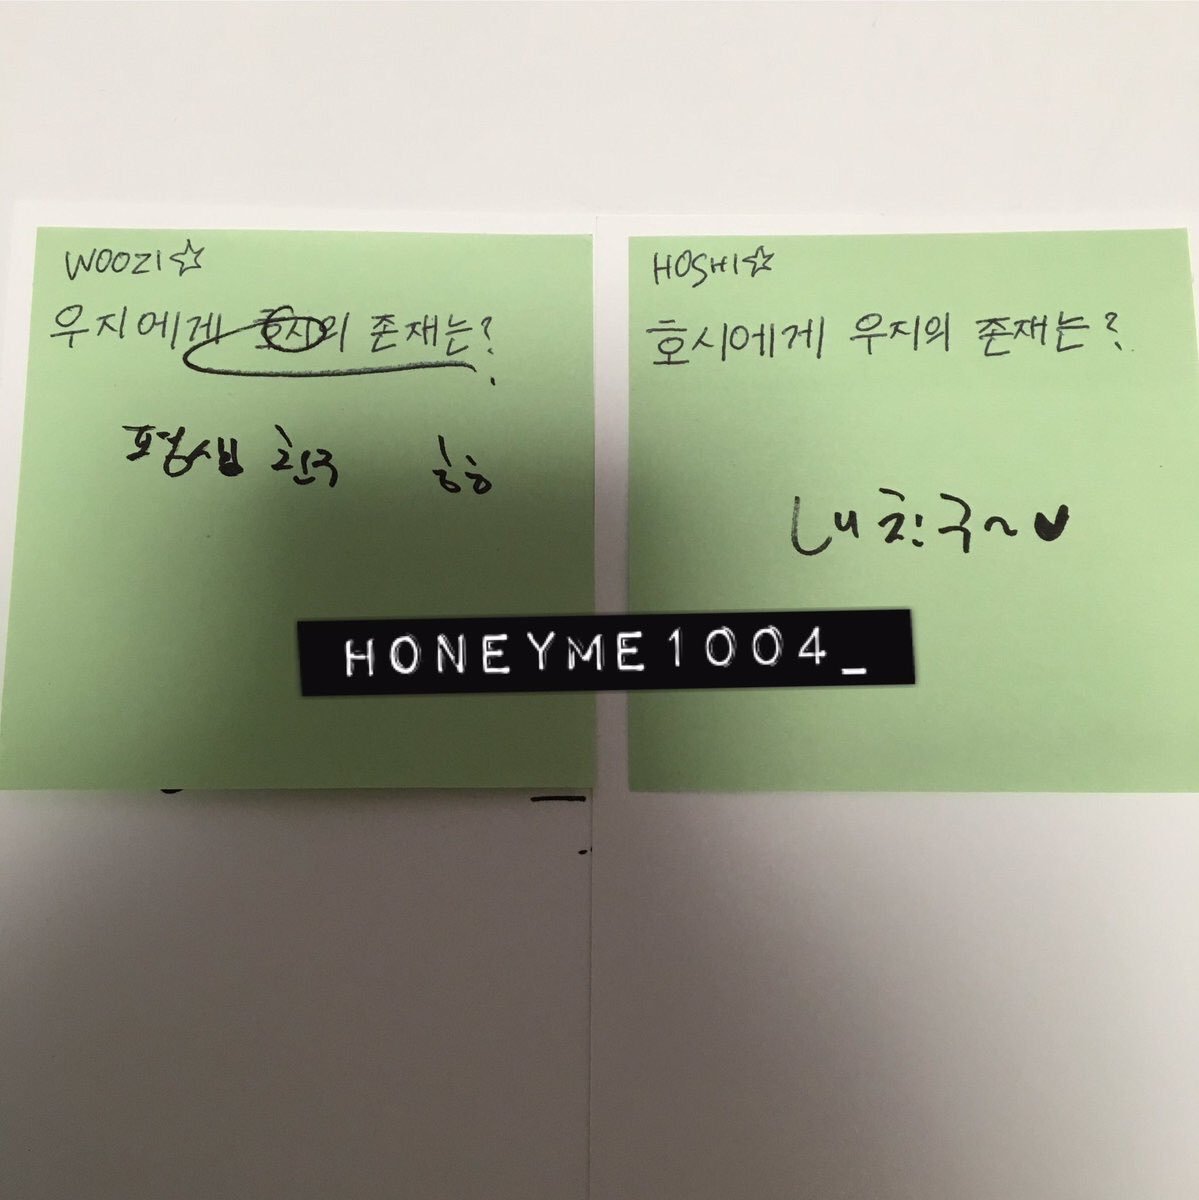 What hoshi means to you?Woozi : friend for life hahaWhat woozi means to you?Hoshi : my friend 